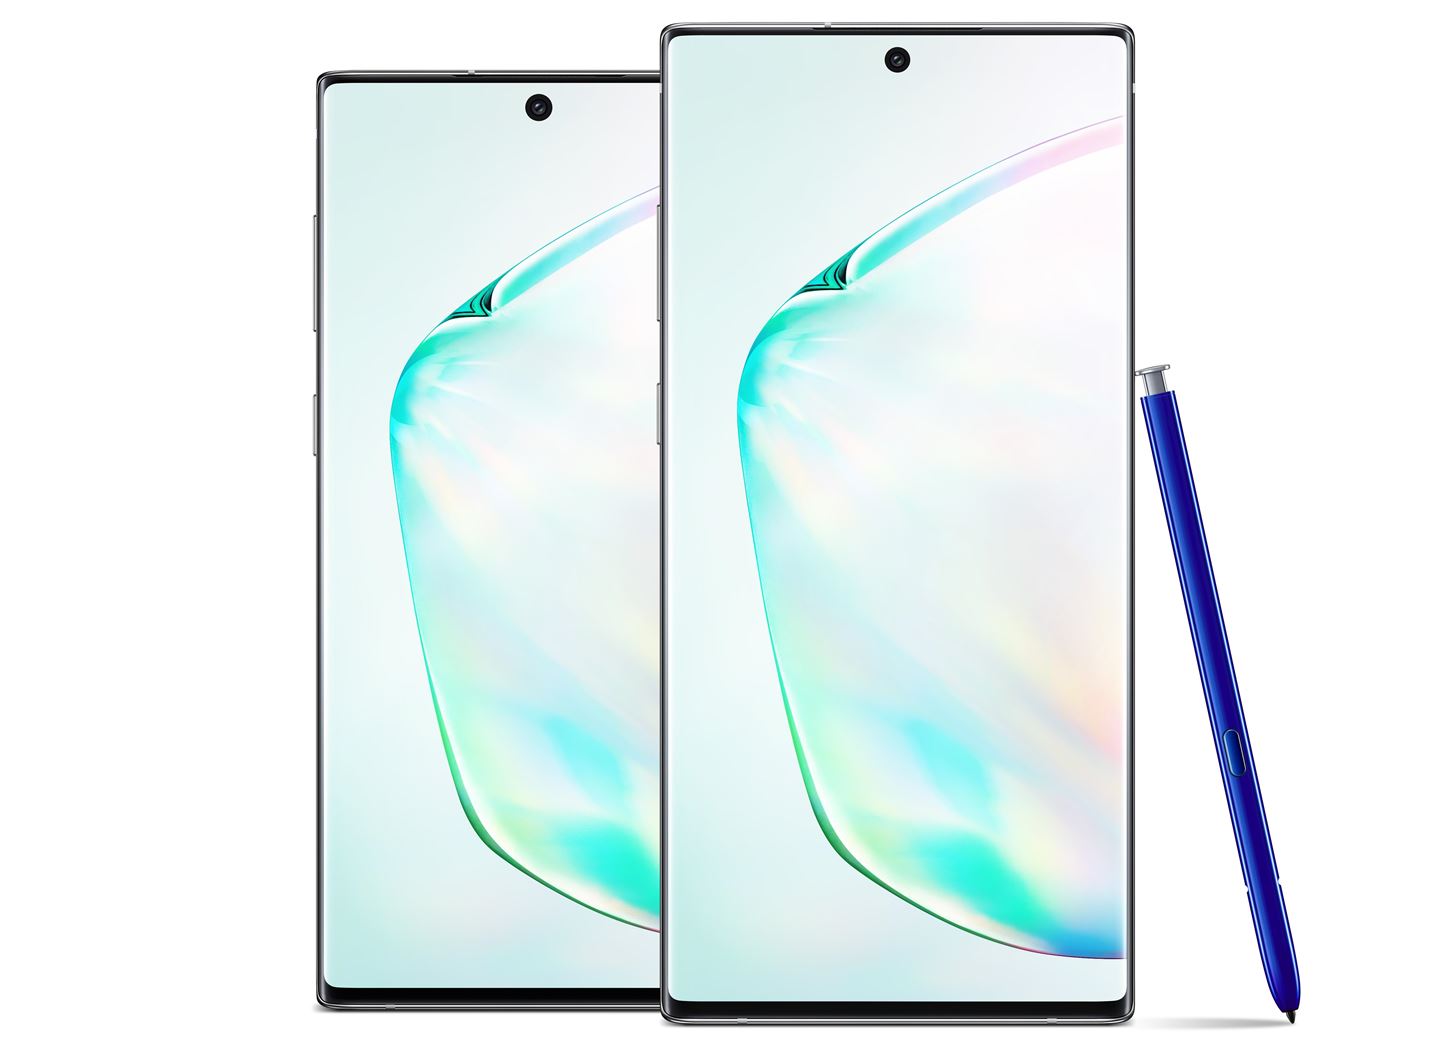 Galaxy Note 10+ Hands-on Review & Spec Sheet Overview